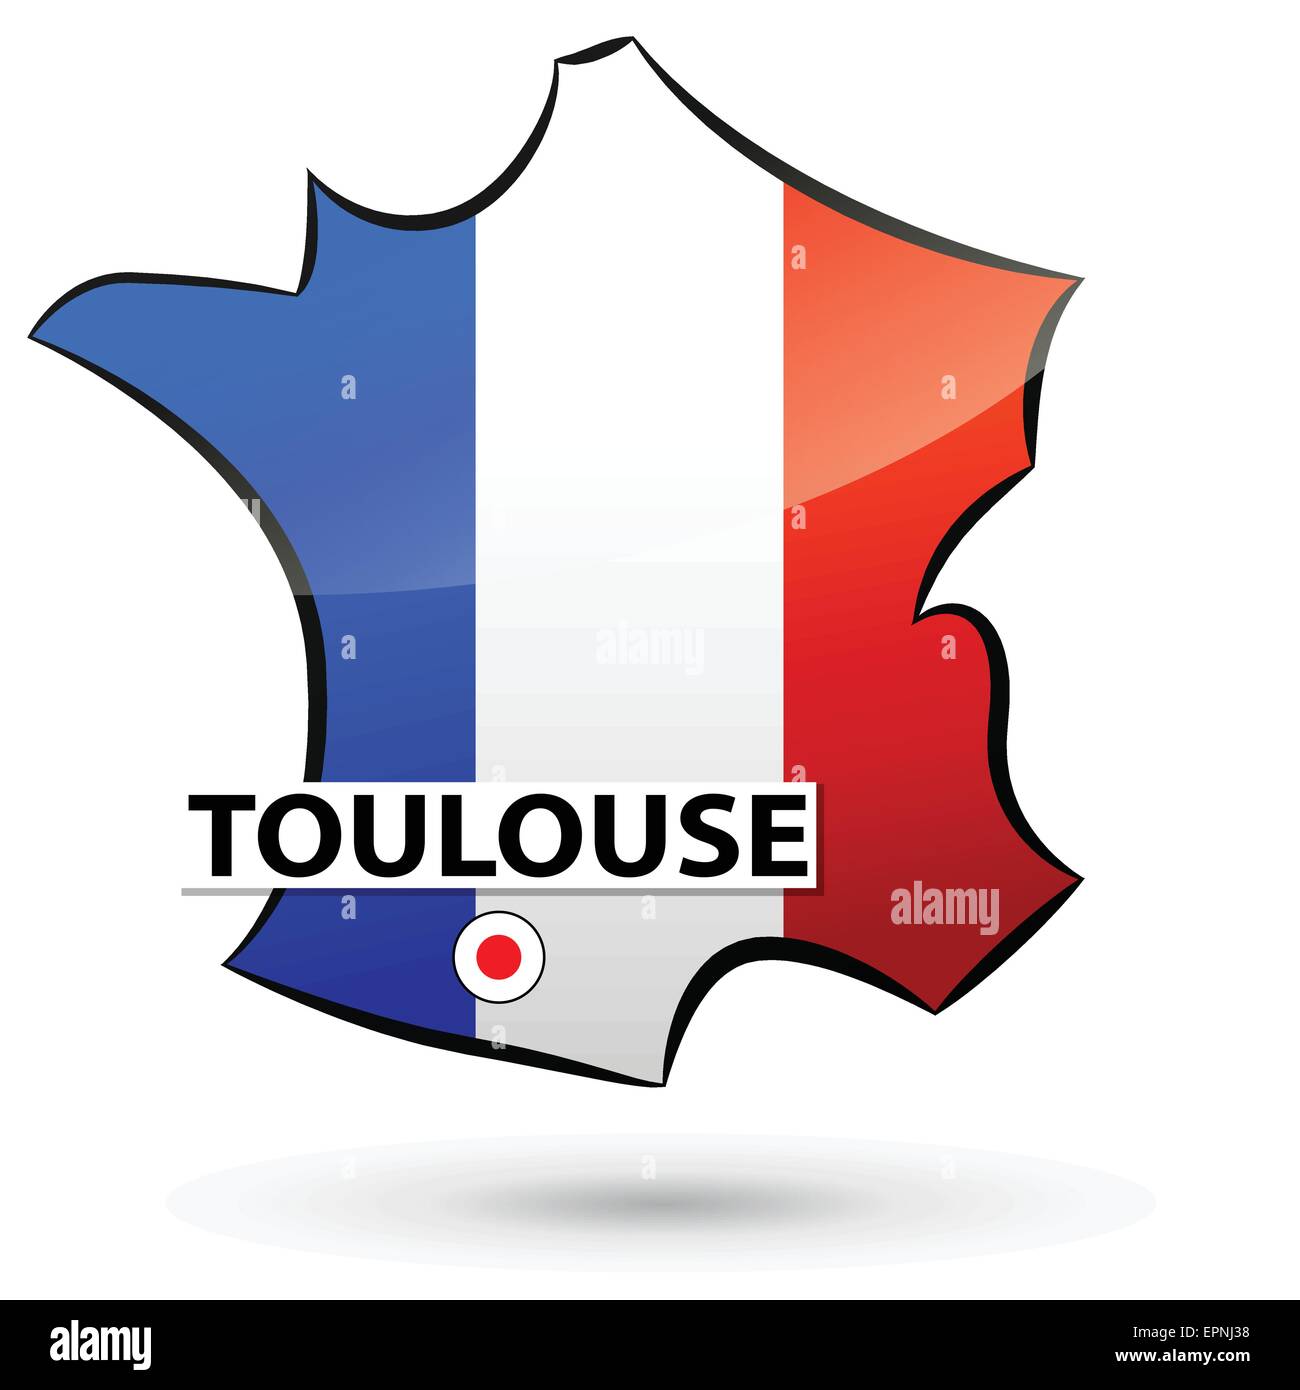 illustration of french map icon for toulouse Stock Vector